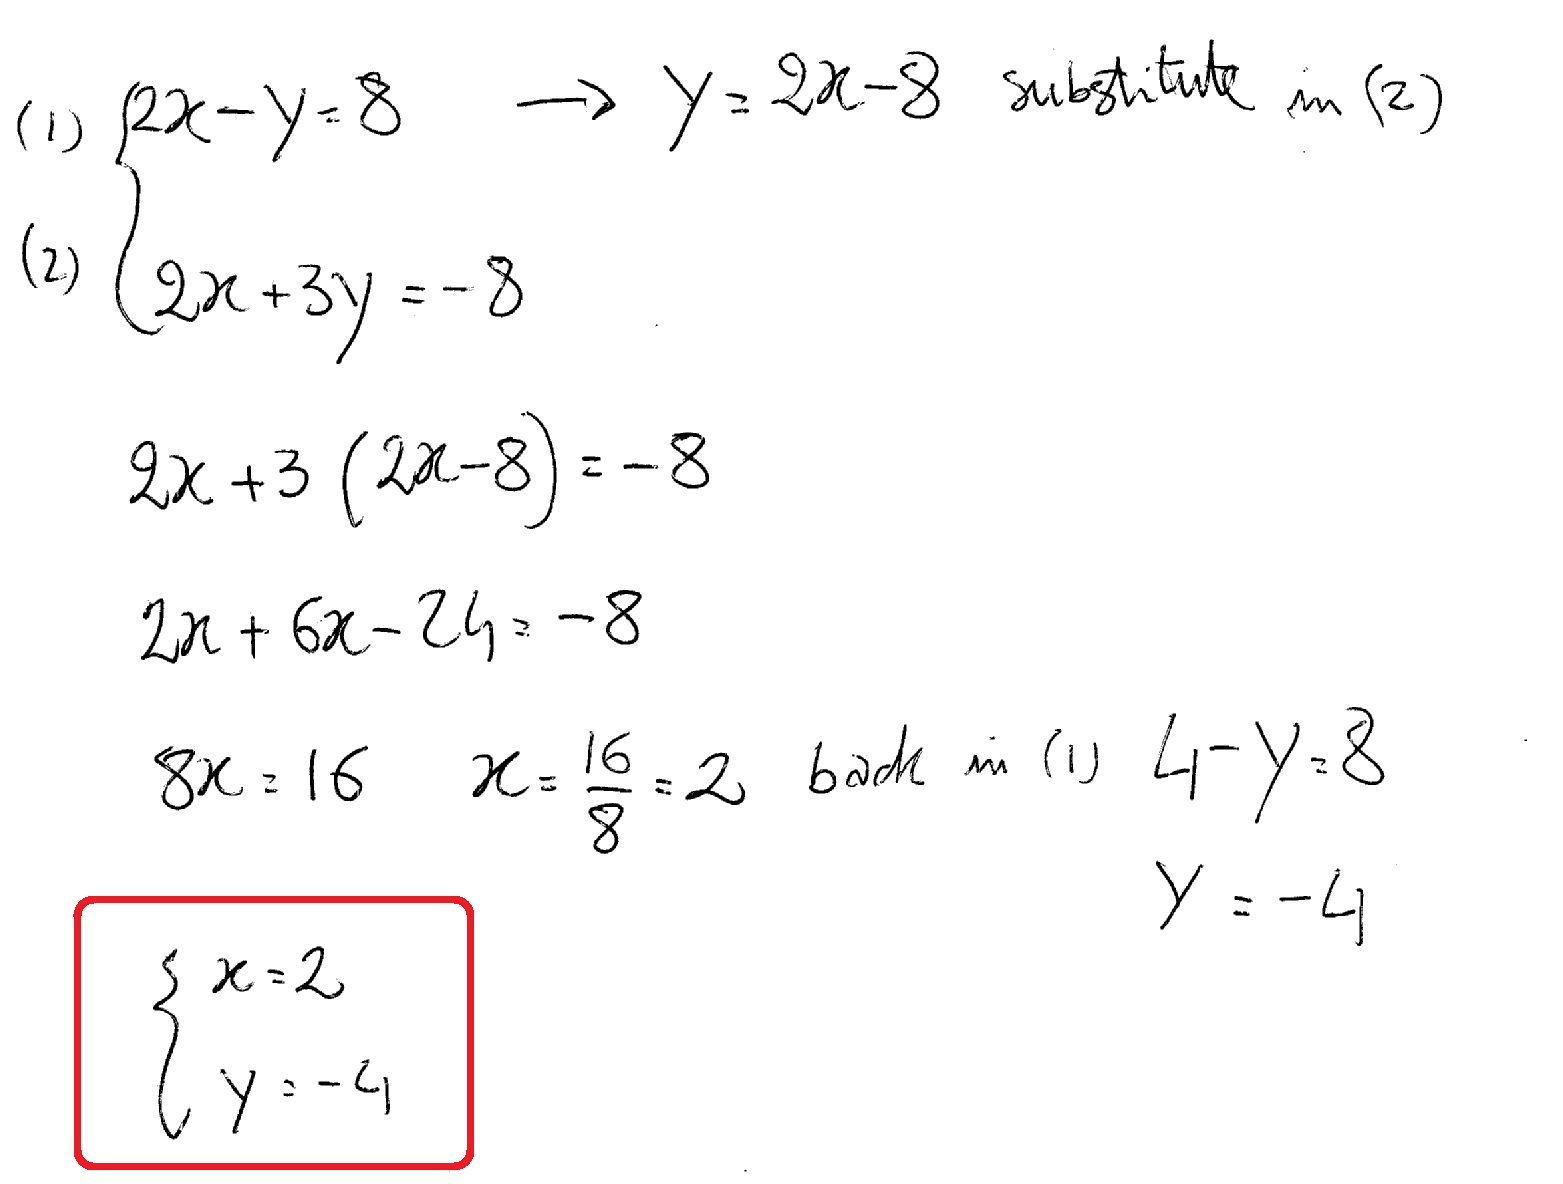 How Do You Solve The System 2x Y 8 And 2x 3y 8 By Substitution